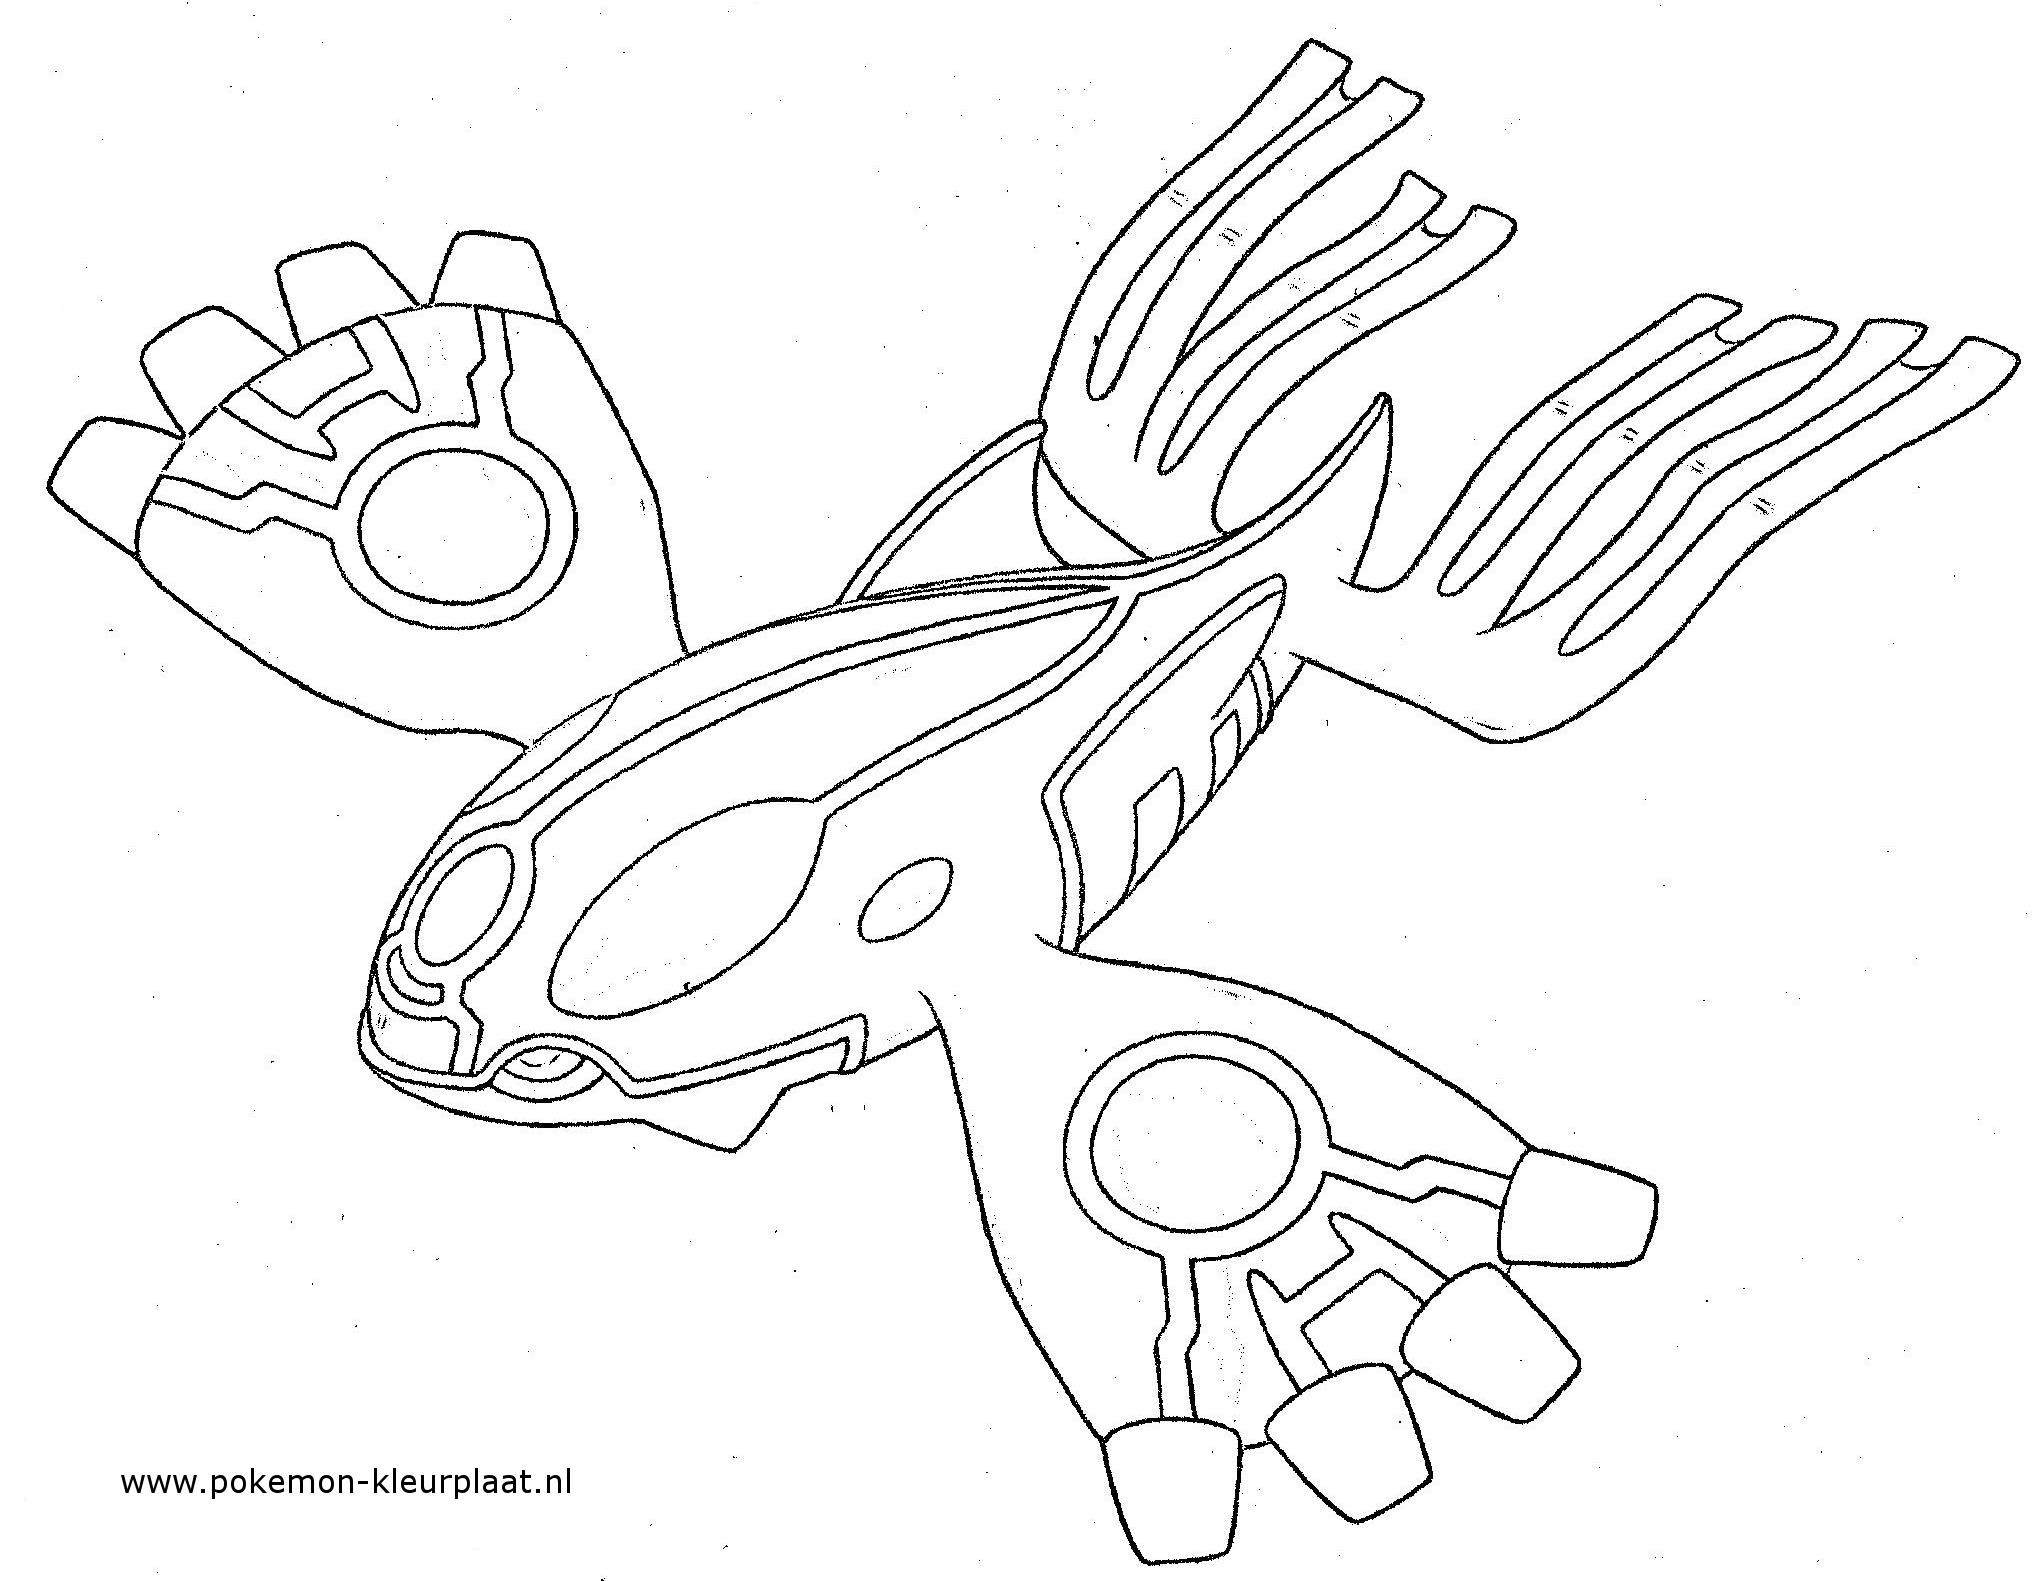 2034x1581 Primal Kyogre 2034x1581 Primal Kyogre 480x325 Primal Kyogre Coloring Page